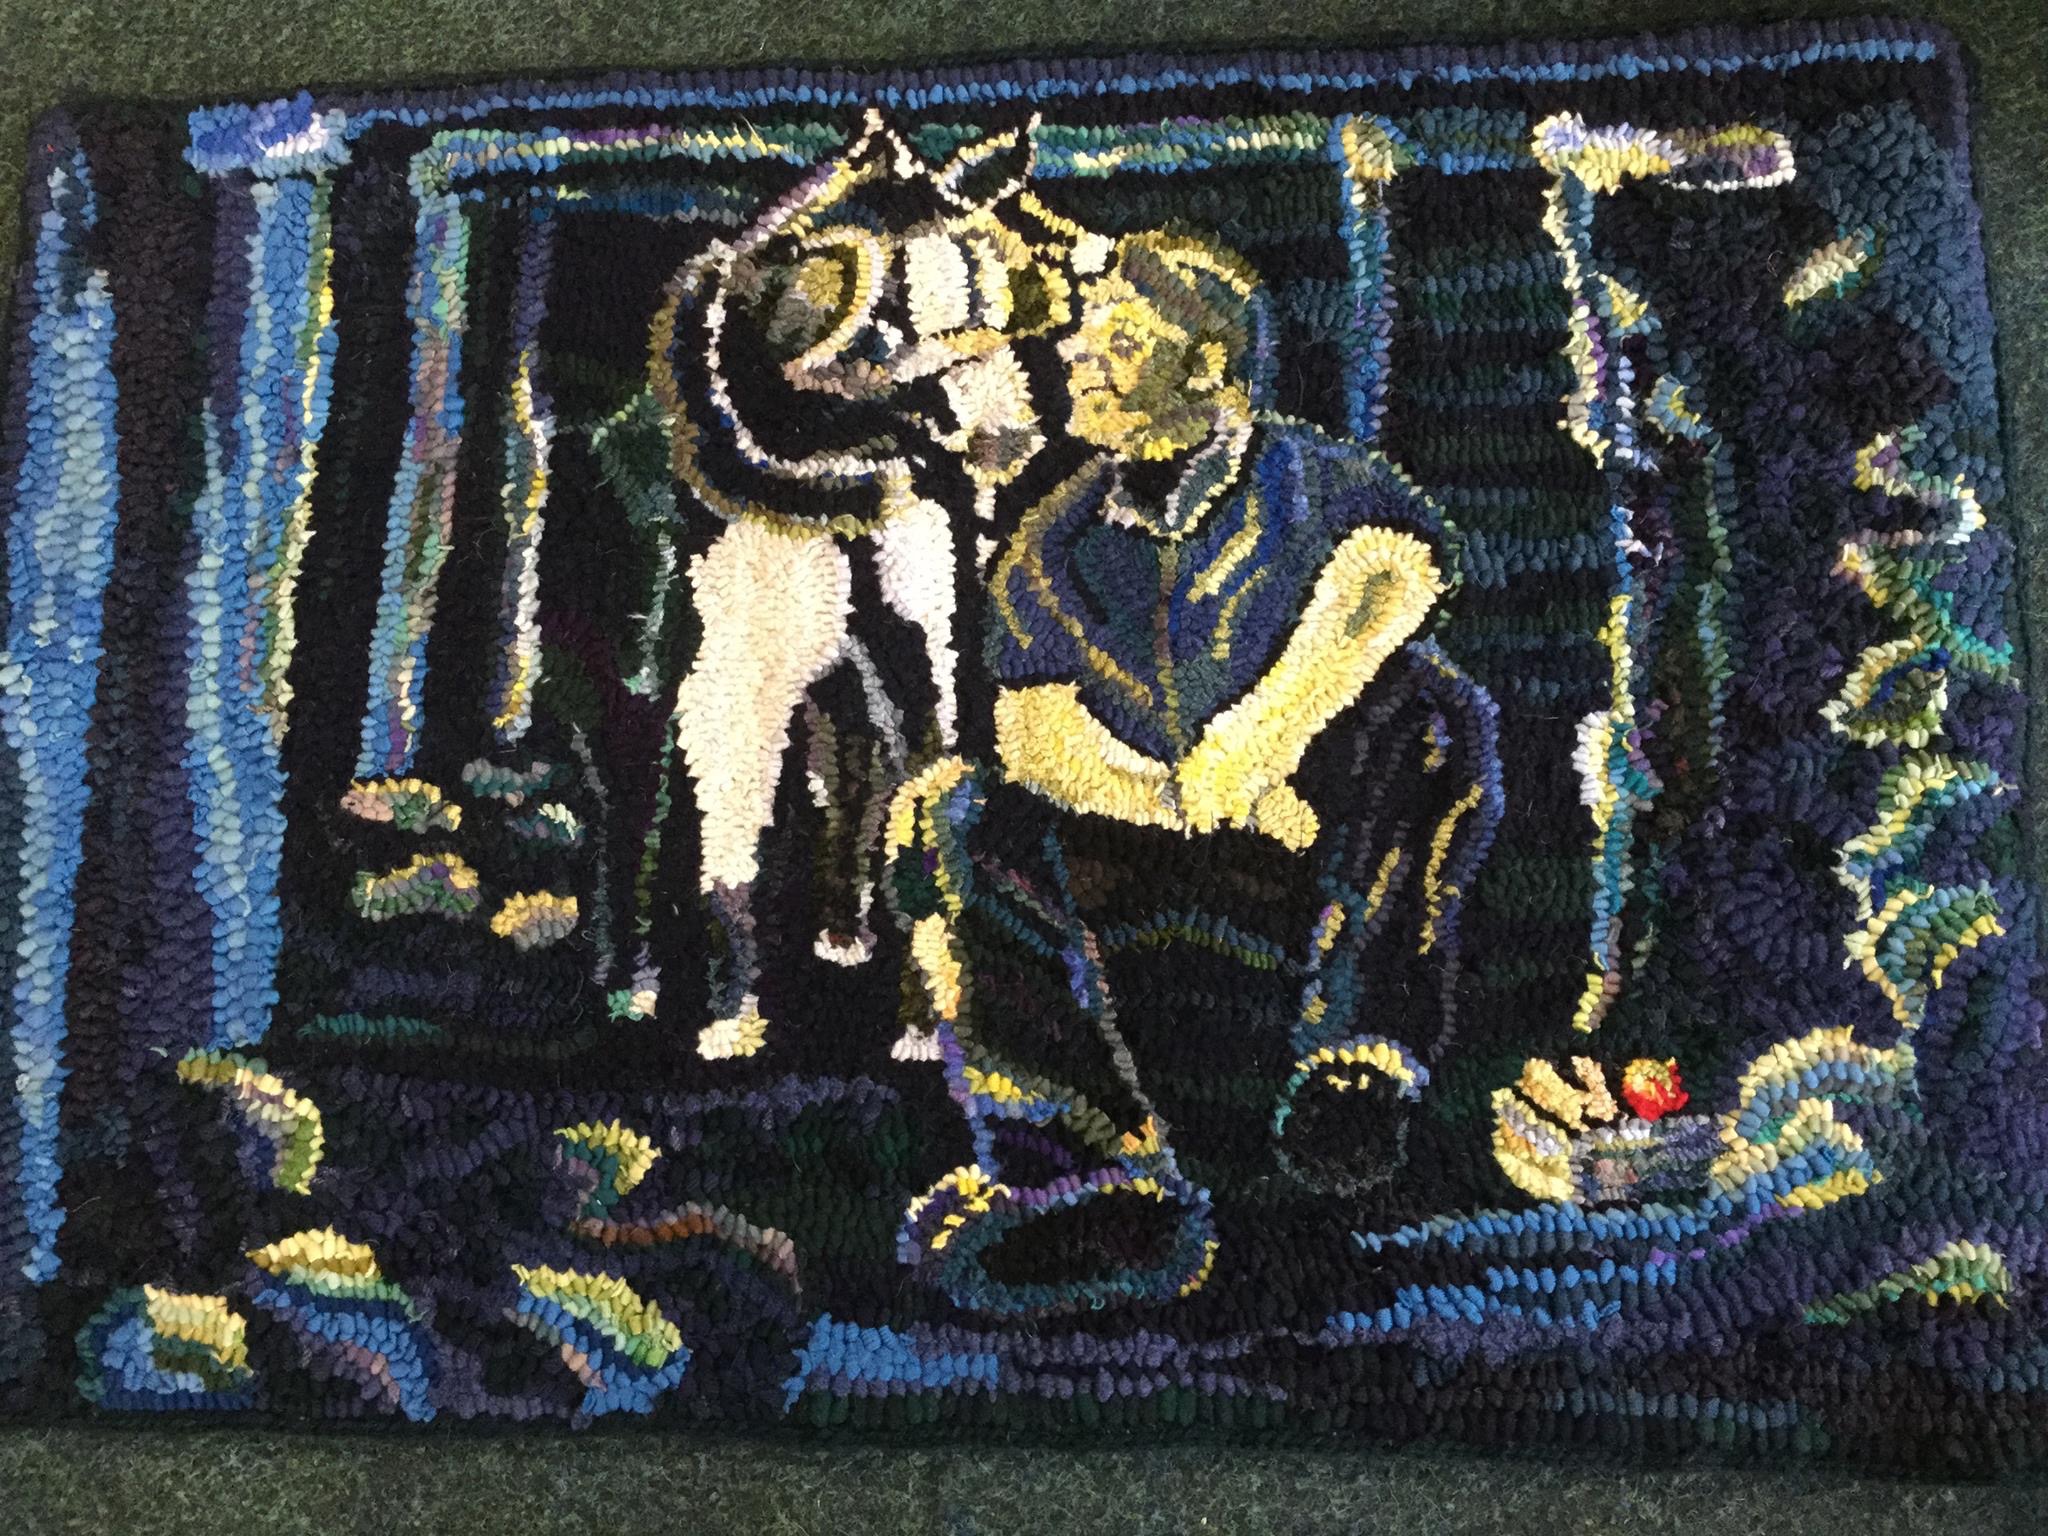 Rag Rug miner and dog picture by Heather Ritchie hooked rag rug wall hanging